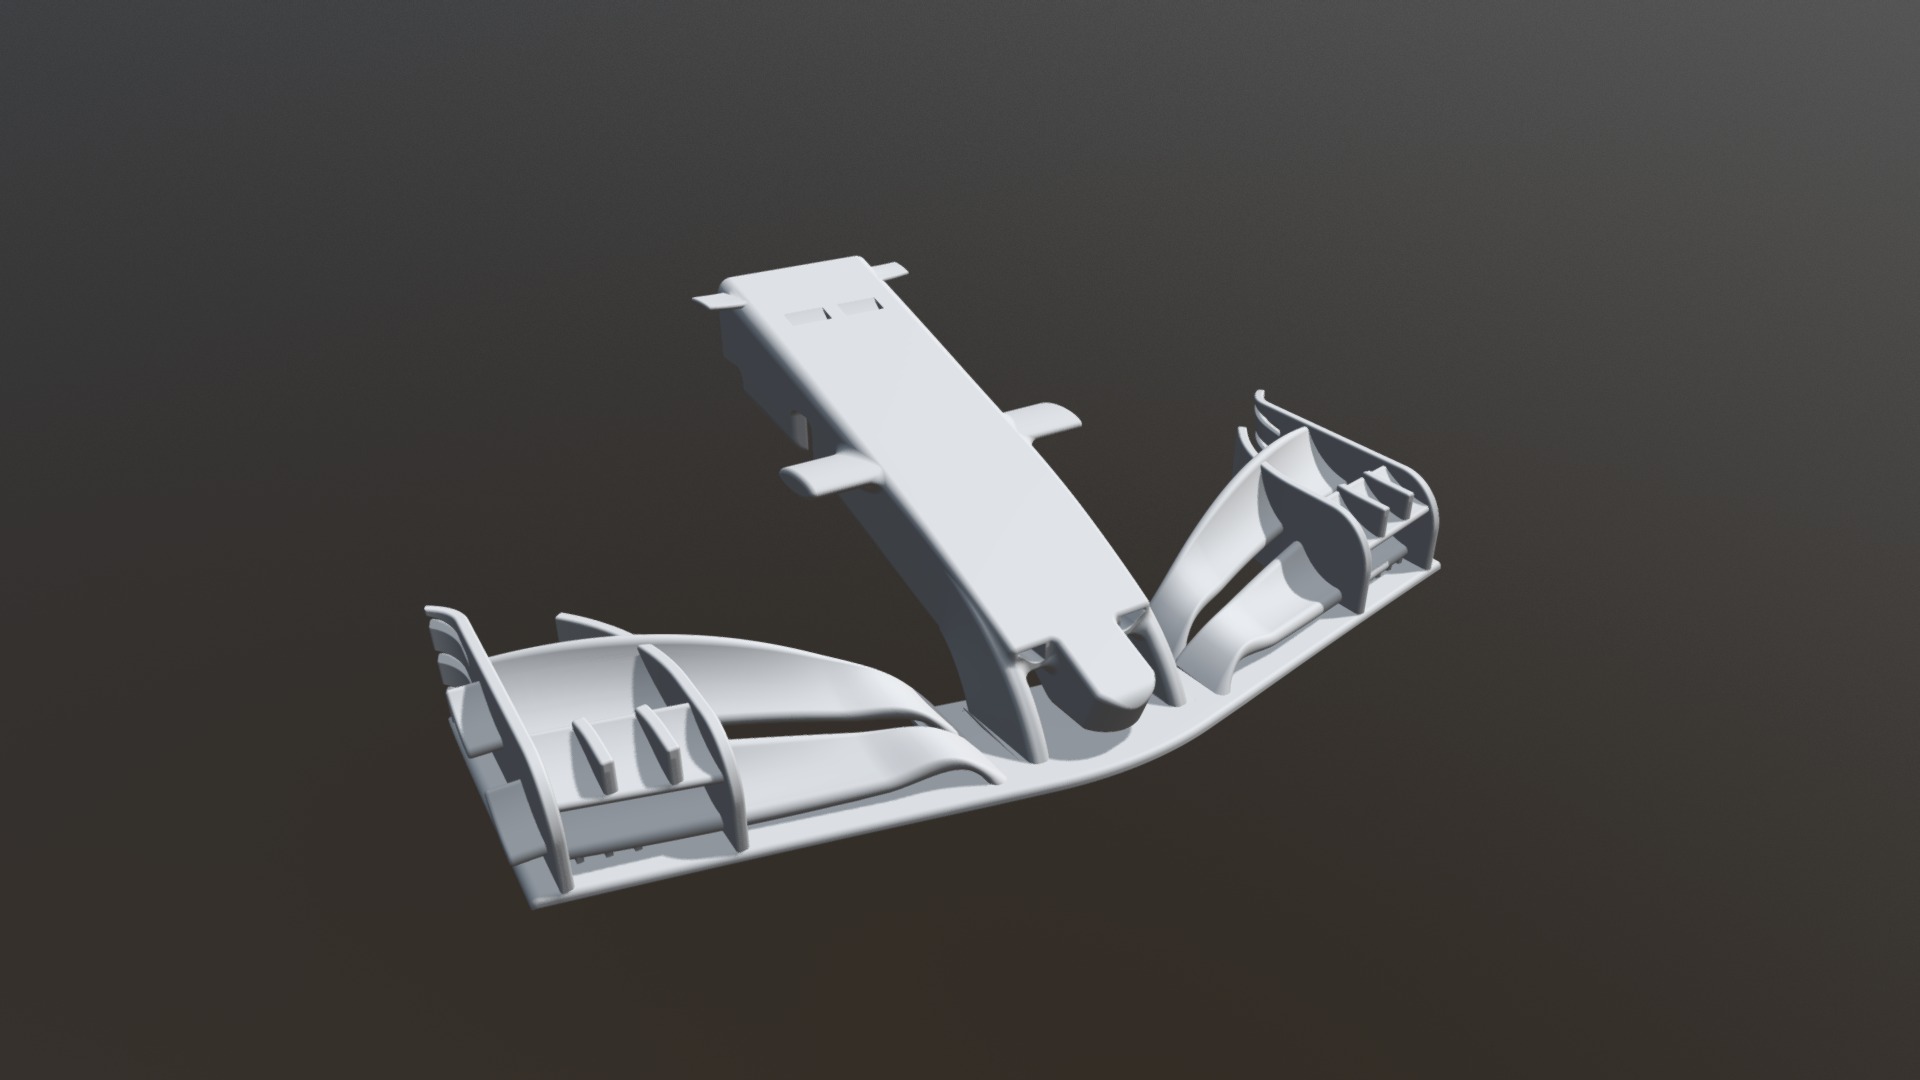 3D model F1 2018 front wing - This is a 3D model of the F1 2018 front wing. The 3D model is about a white and black logo.